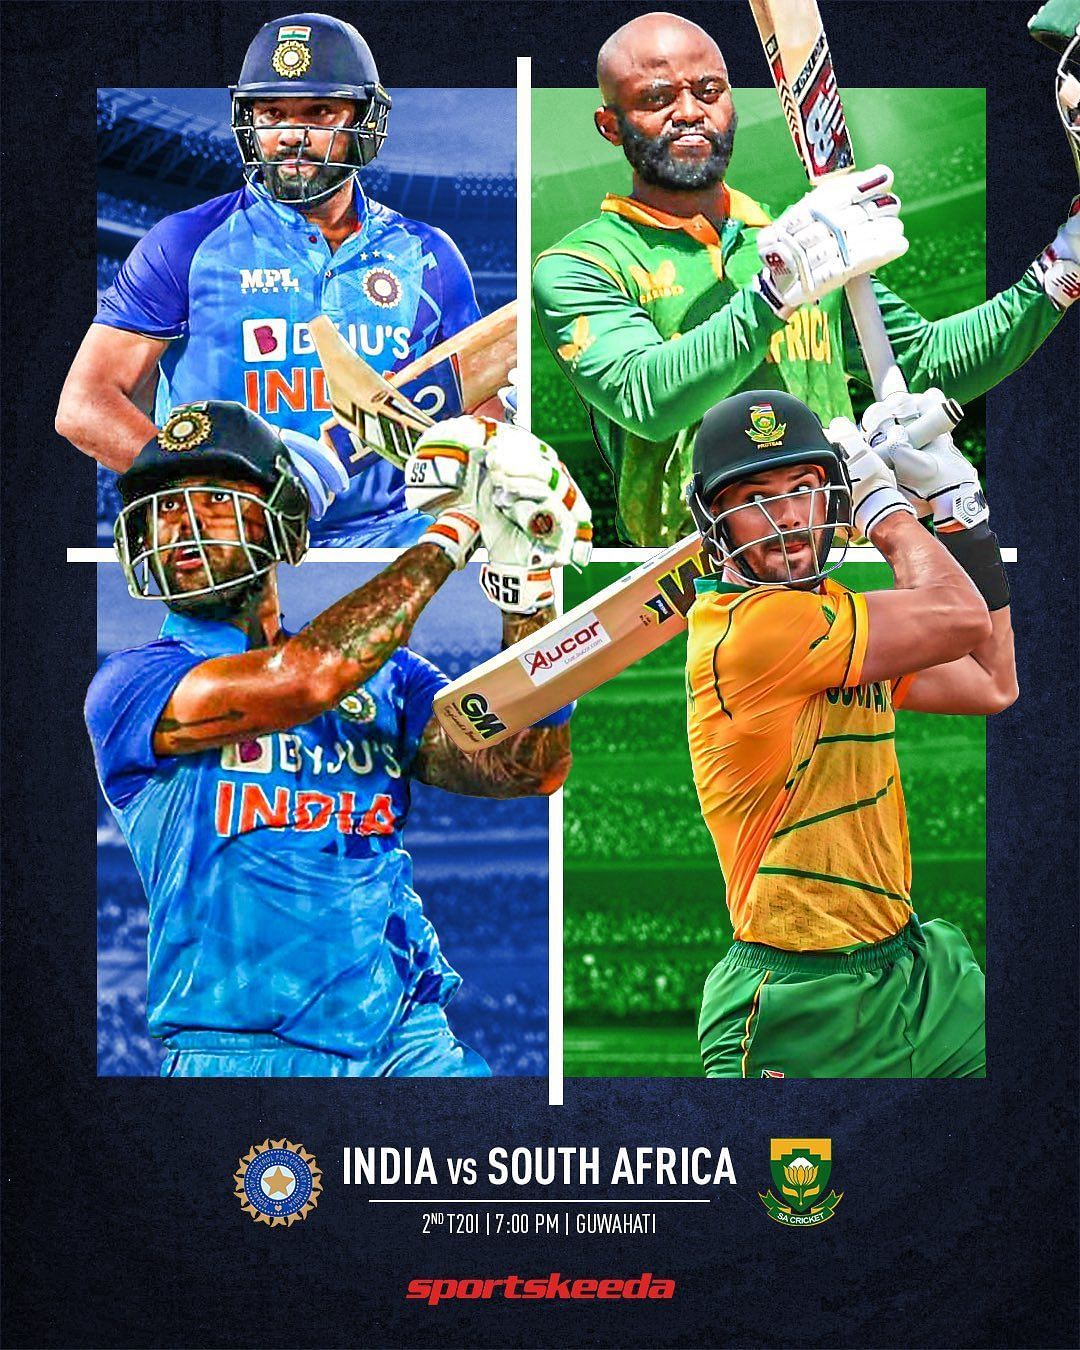 India will take on South Africa for the second T20I in Guwahati [Pic Credit: Sportskeeda]